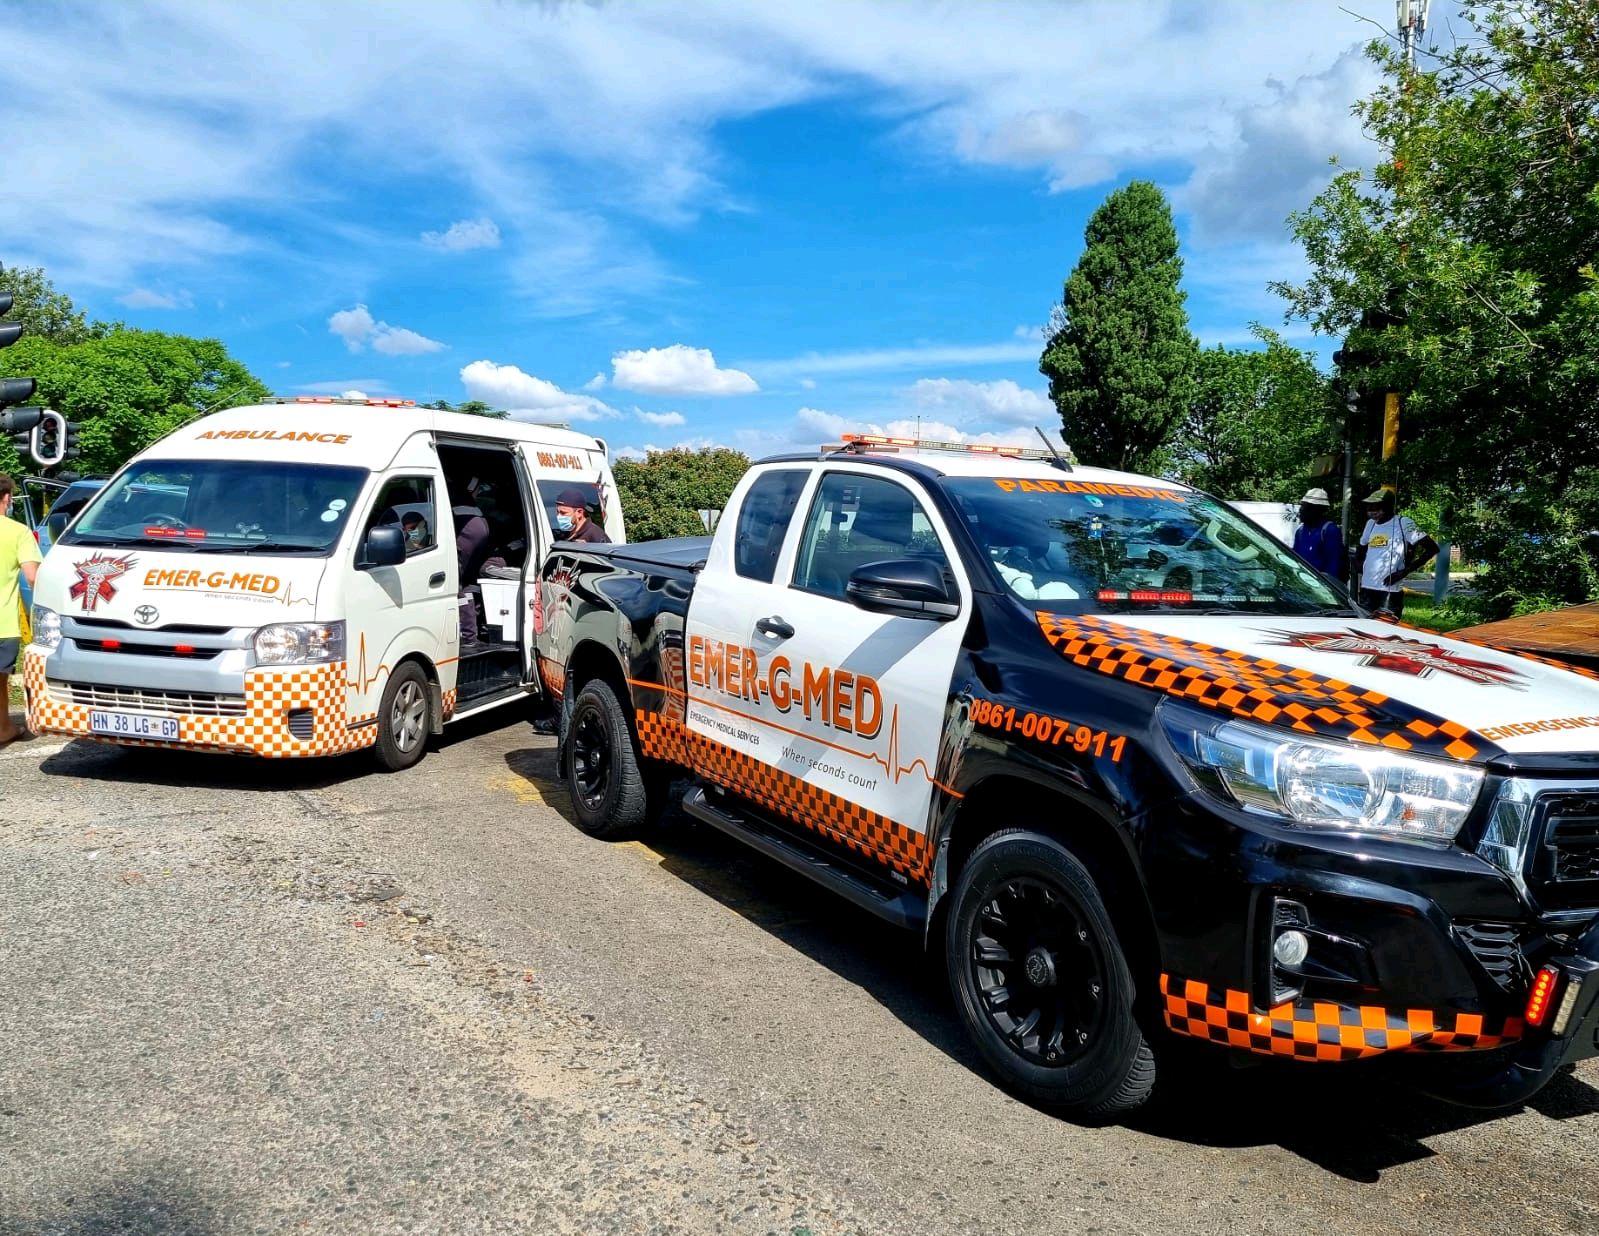 Two injured in a two-vehicle in Randburg